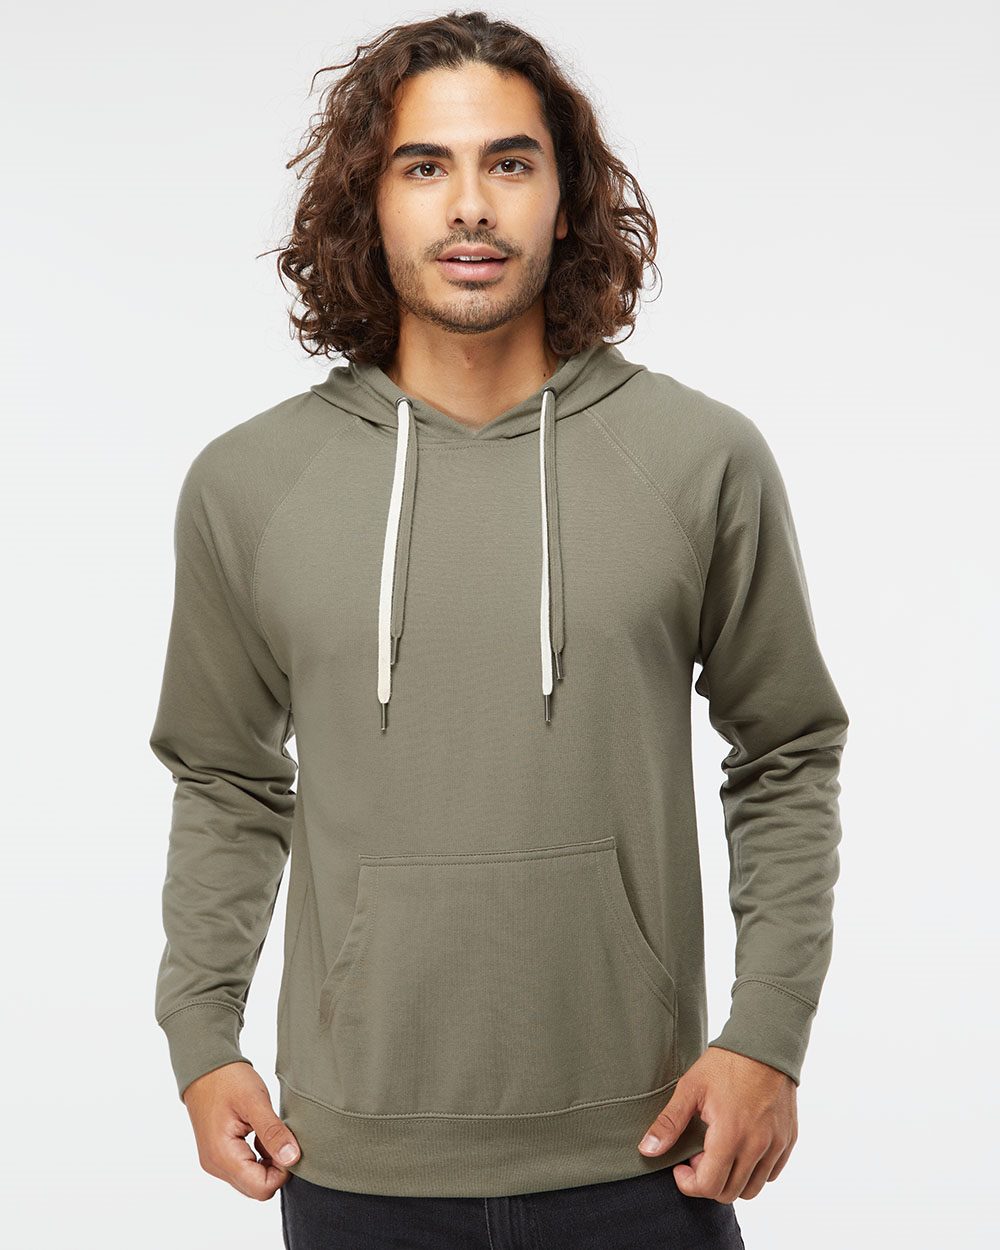 Lightweight Sweatshirt Icon Hooded Independent Co. Trading SS1000 Loopback - Terry